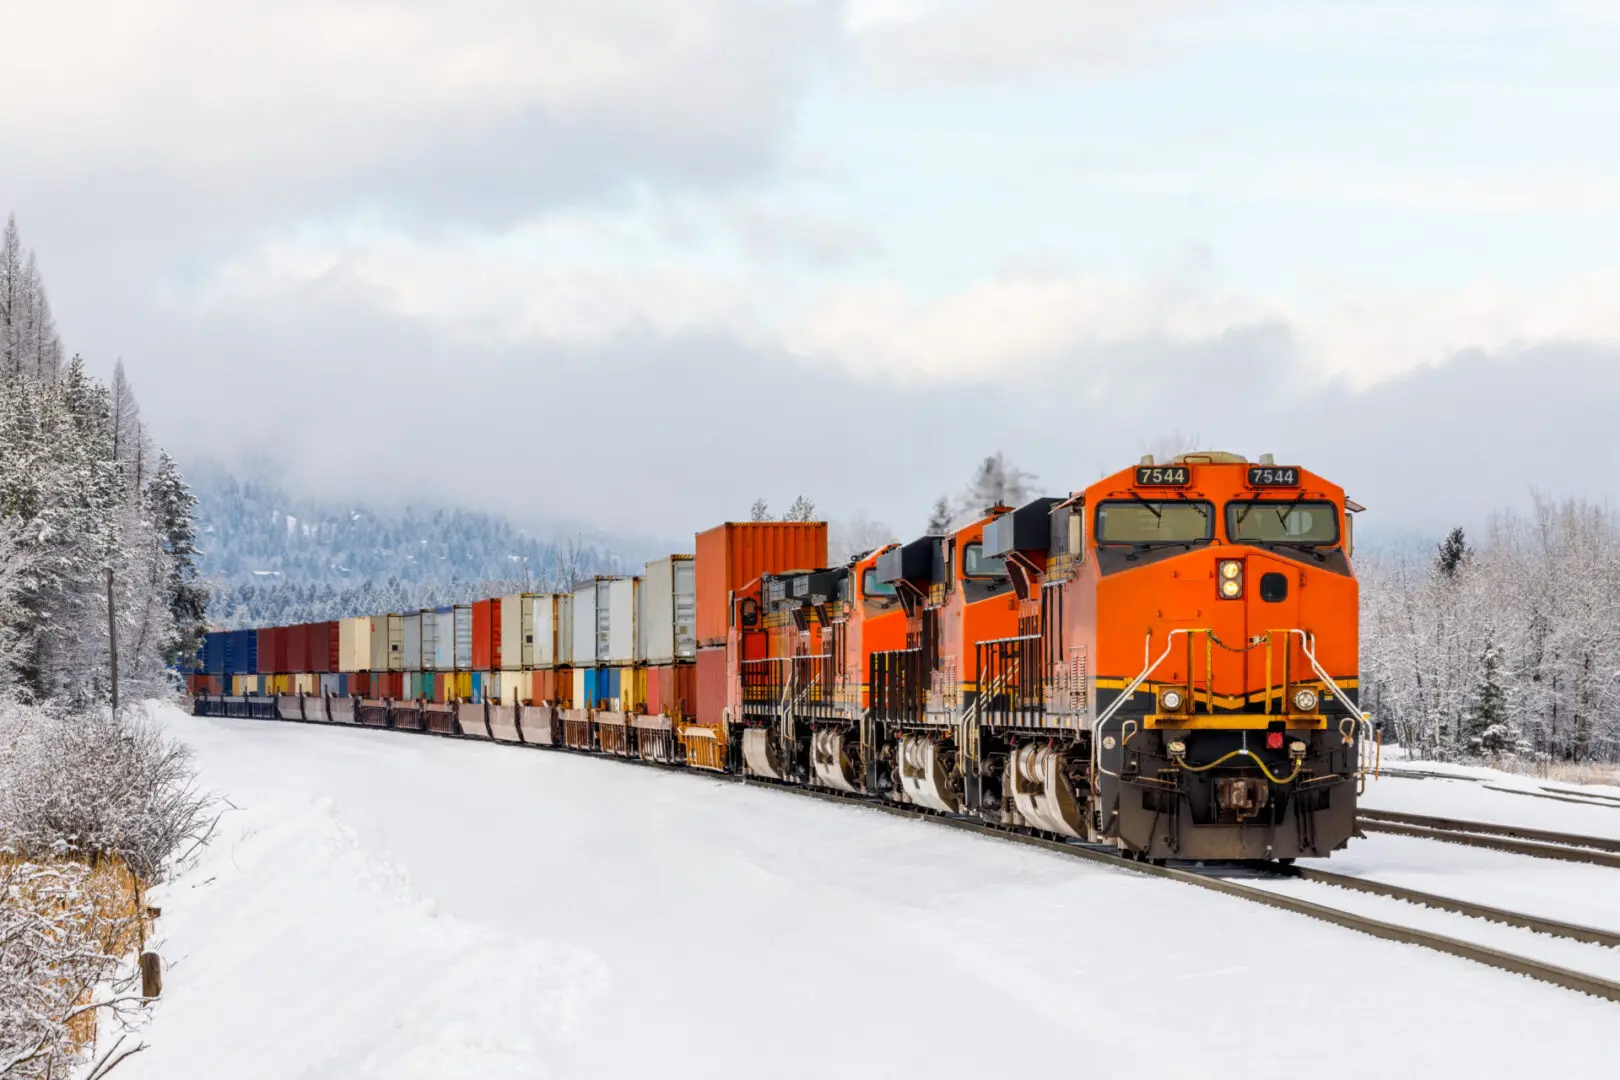 Winter scene of a locomotive pulling a freight train close to Whitefish, Montana with exhaust poring out of the engine on a cold day in January